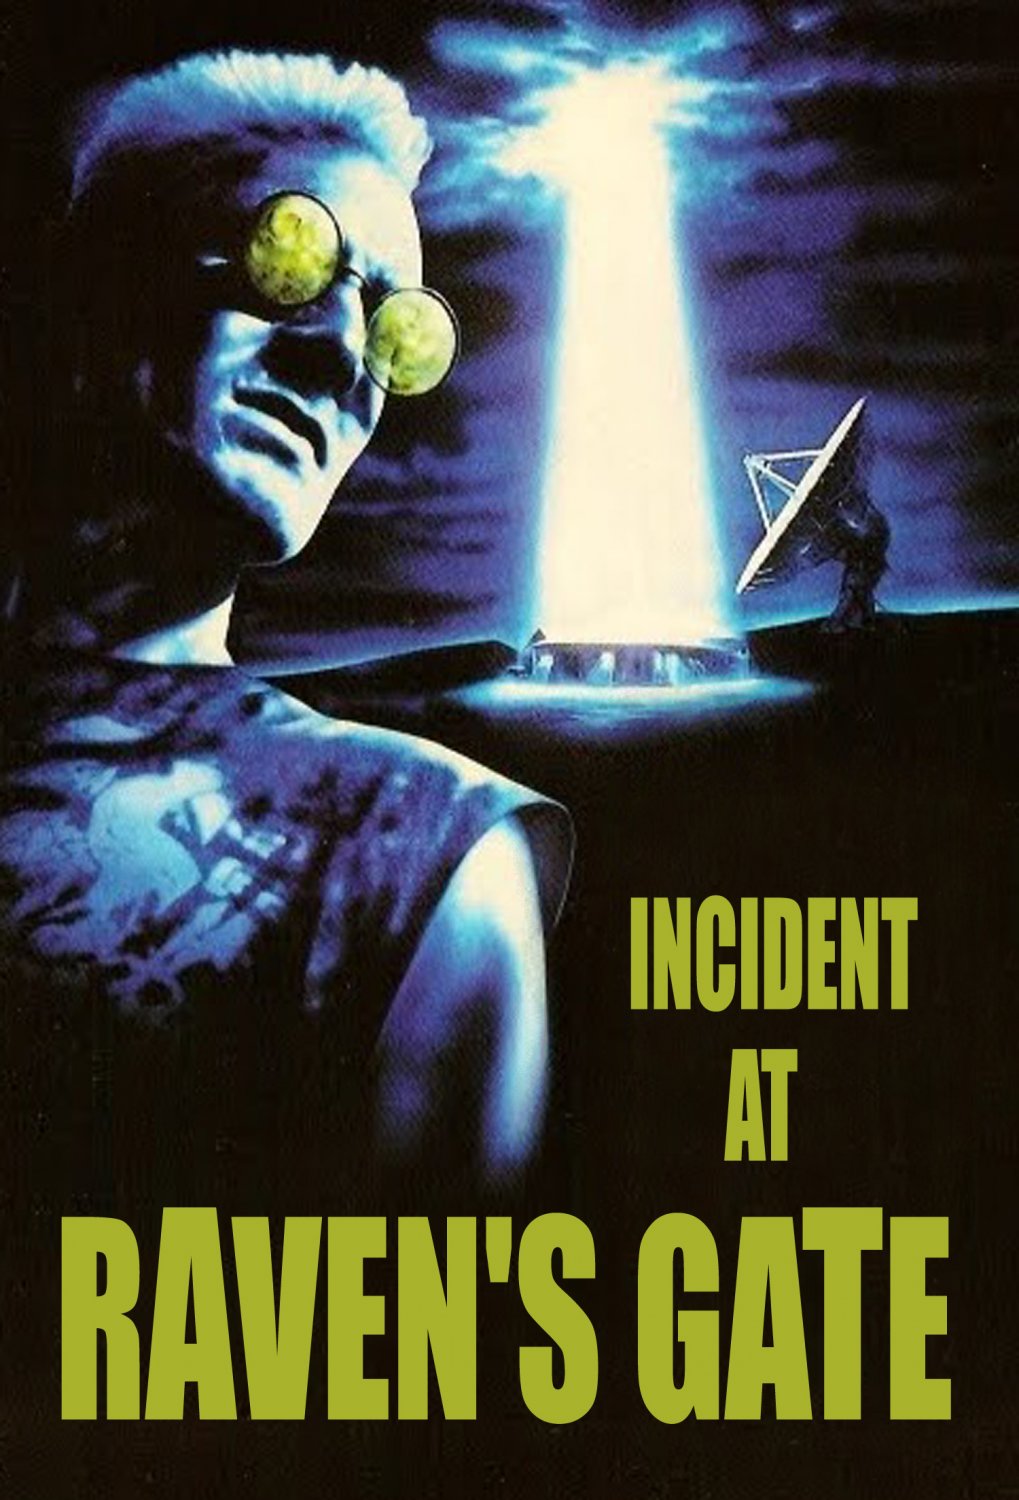 Incident at Raven's Gate (DVD)